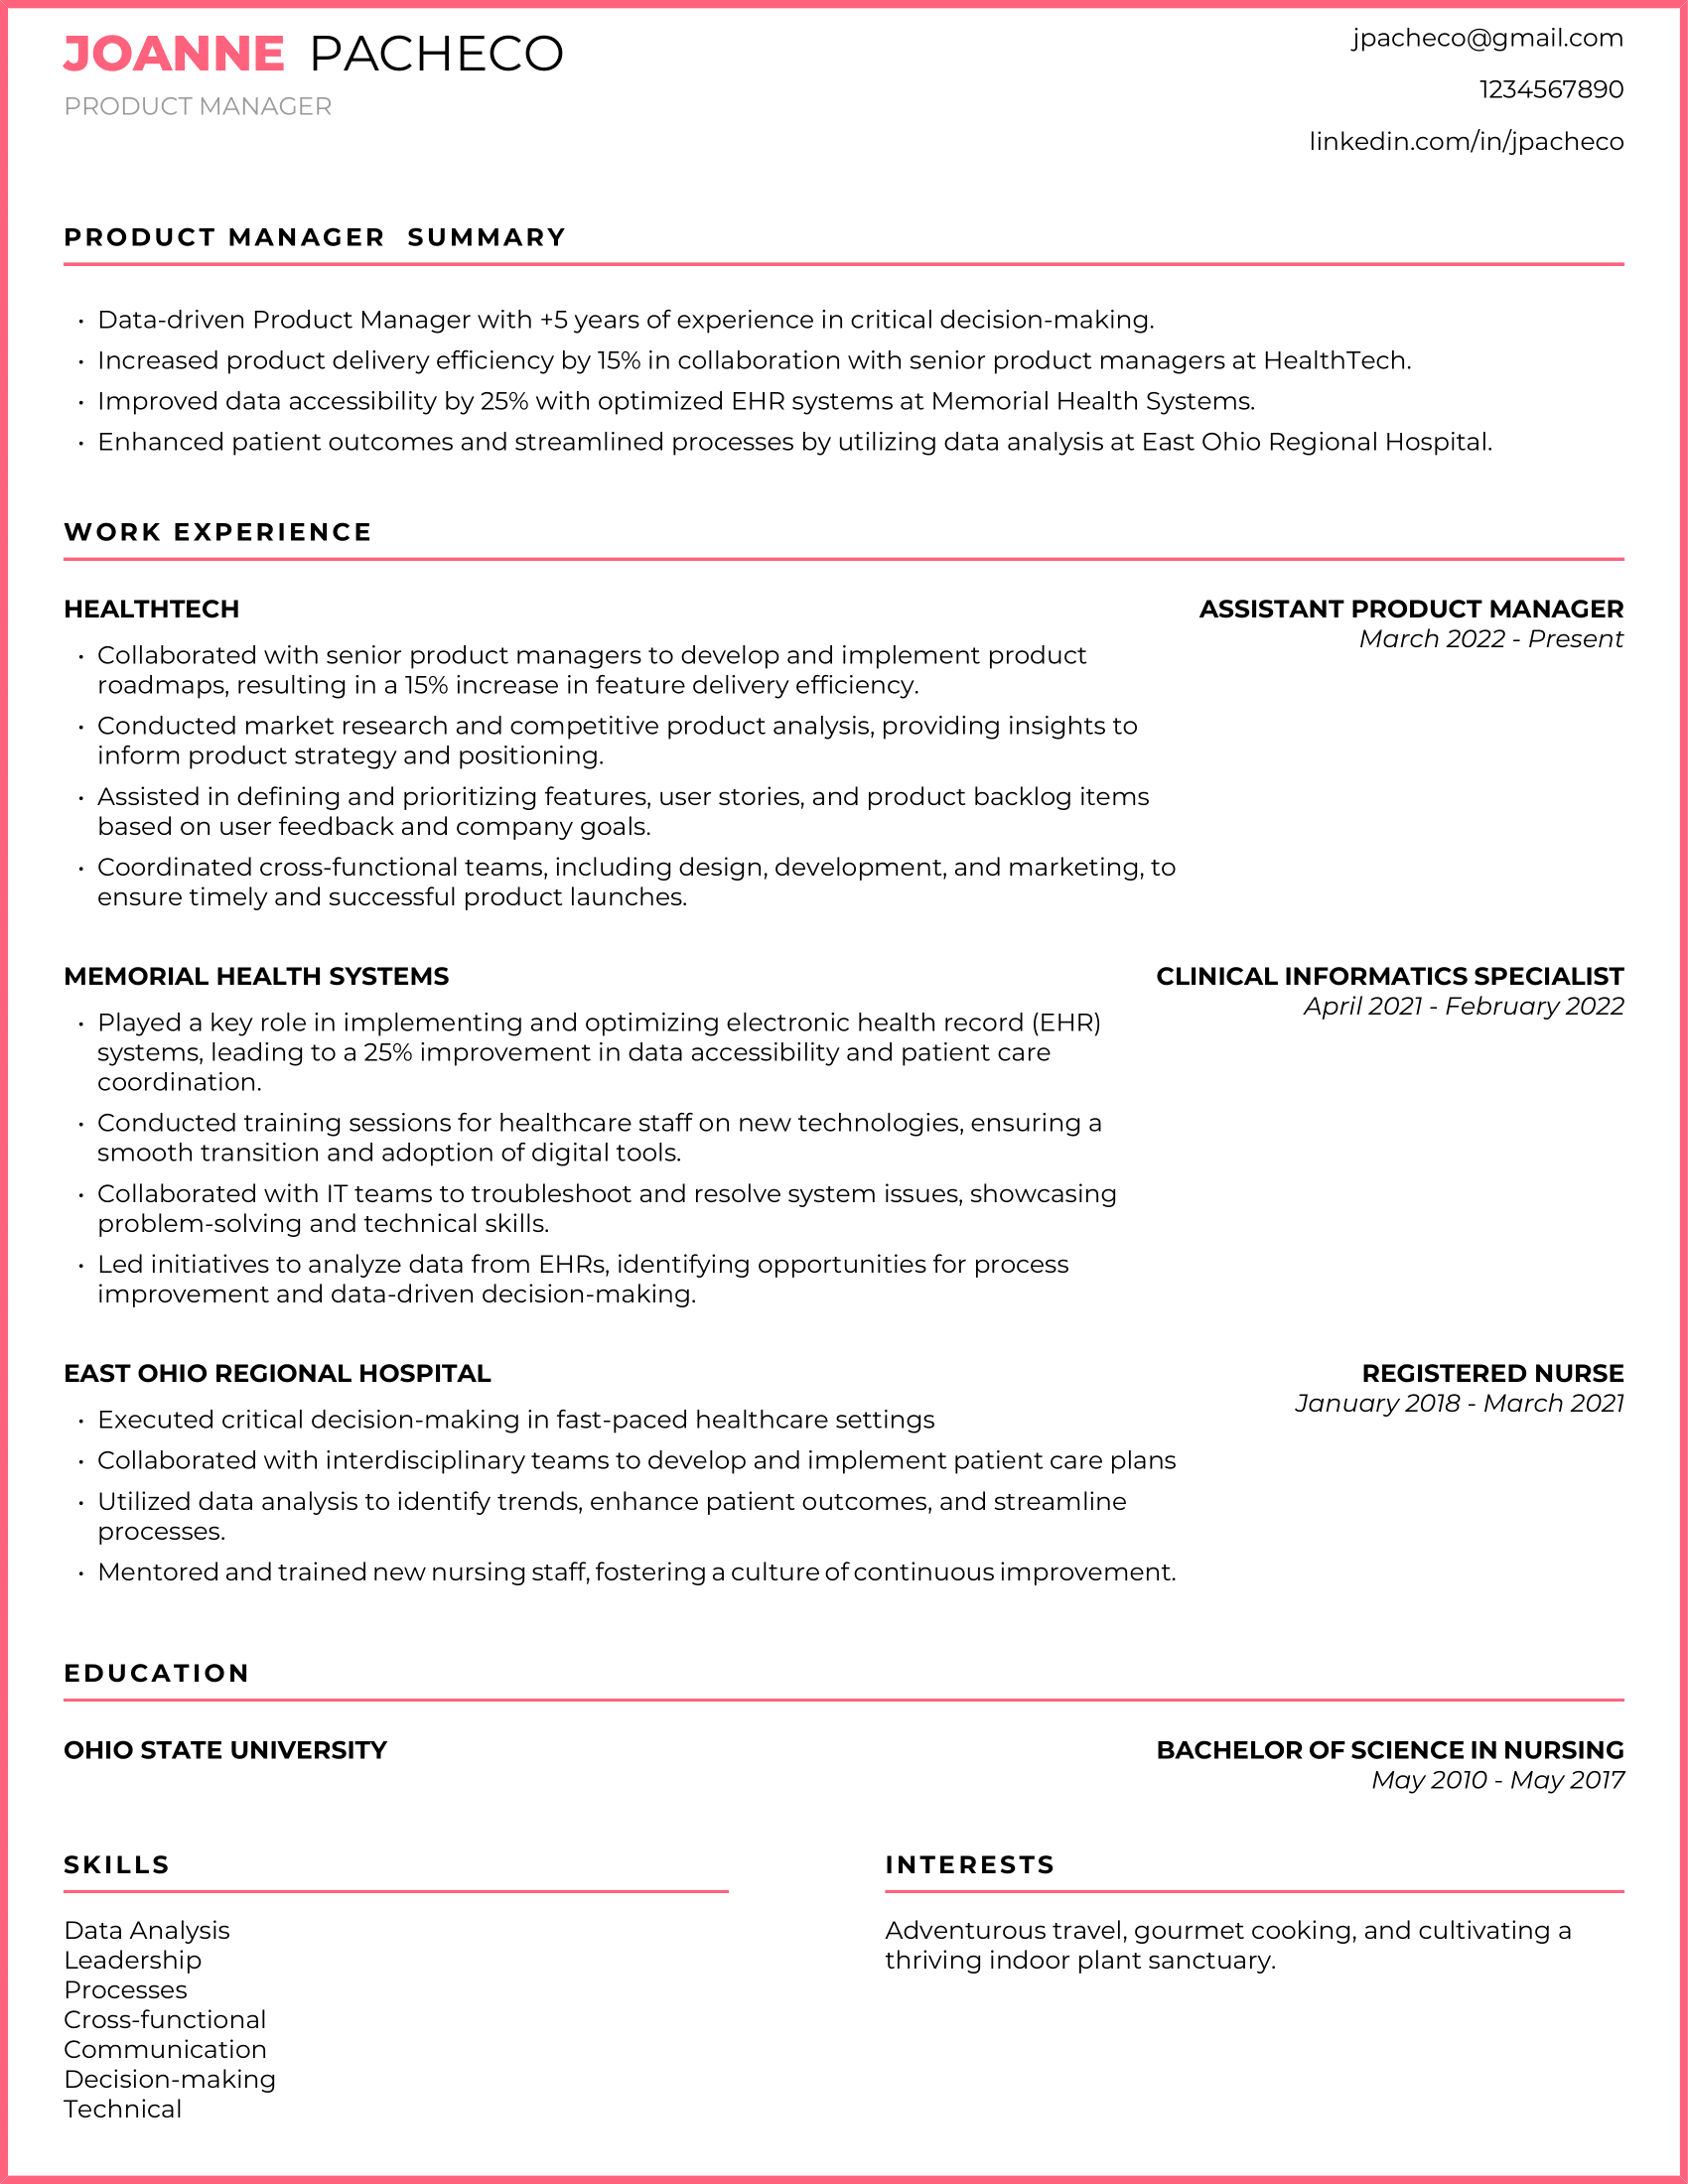 Product Manager Resume Example #2 - Non-Traditional